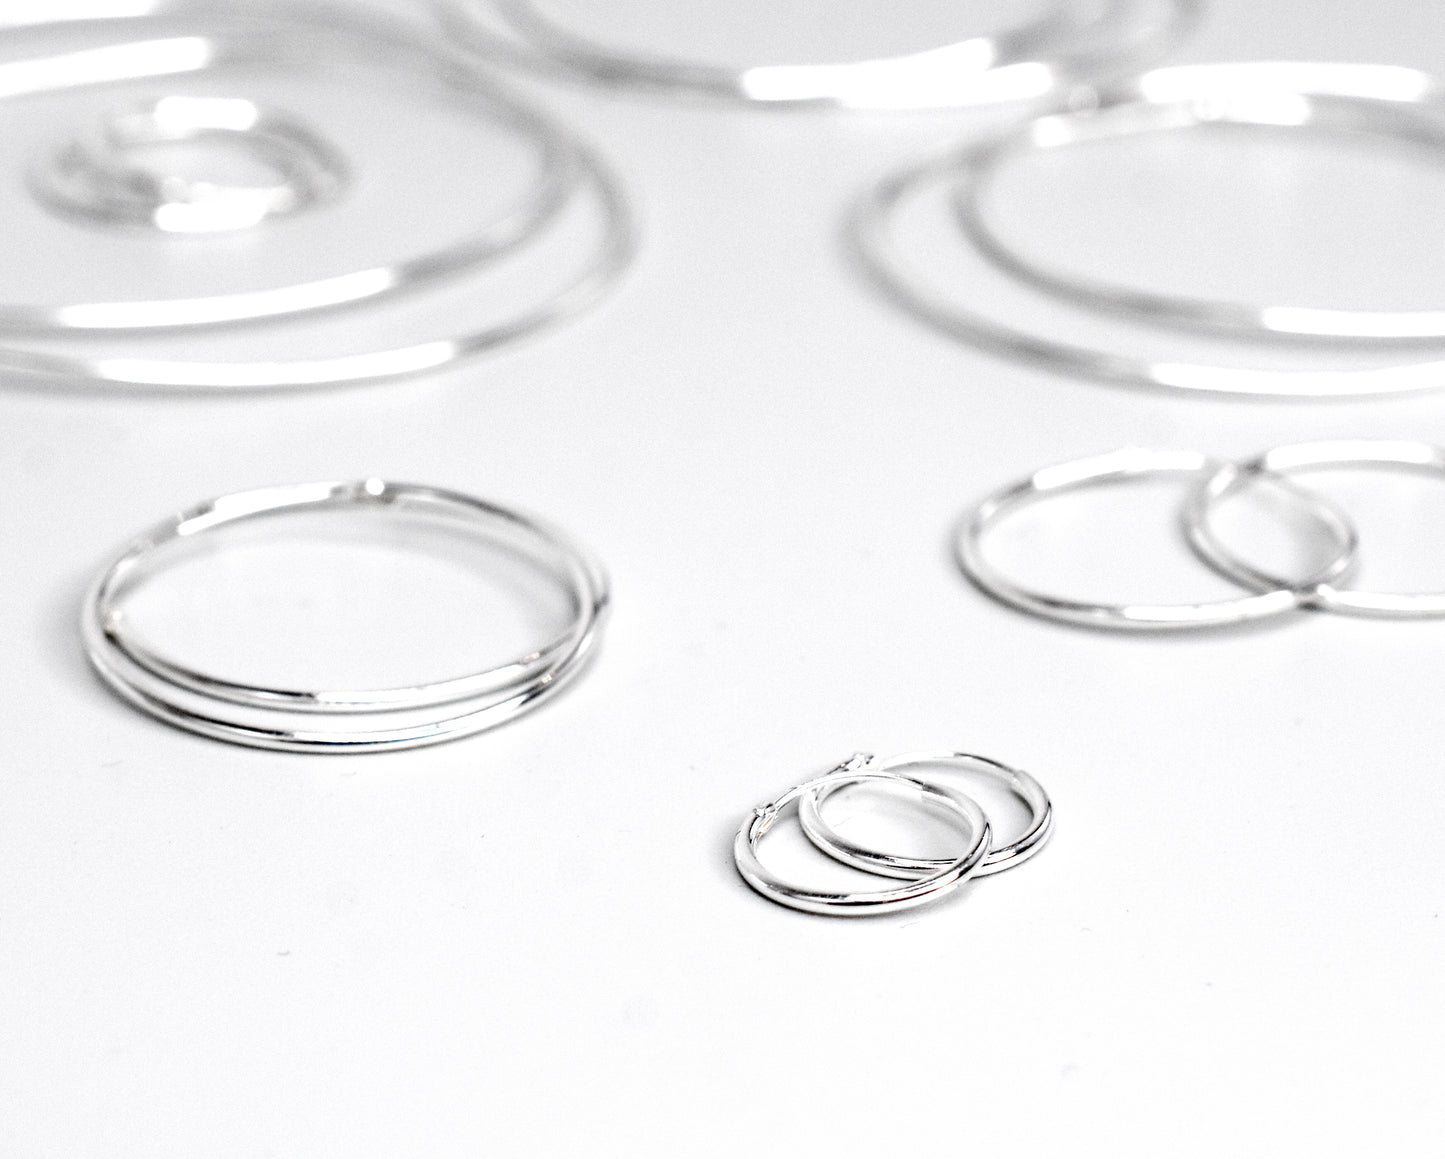 A group of Super Silver's 1.2mm Infinity Hoops on a white surface.